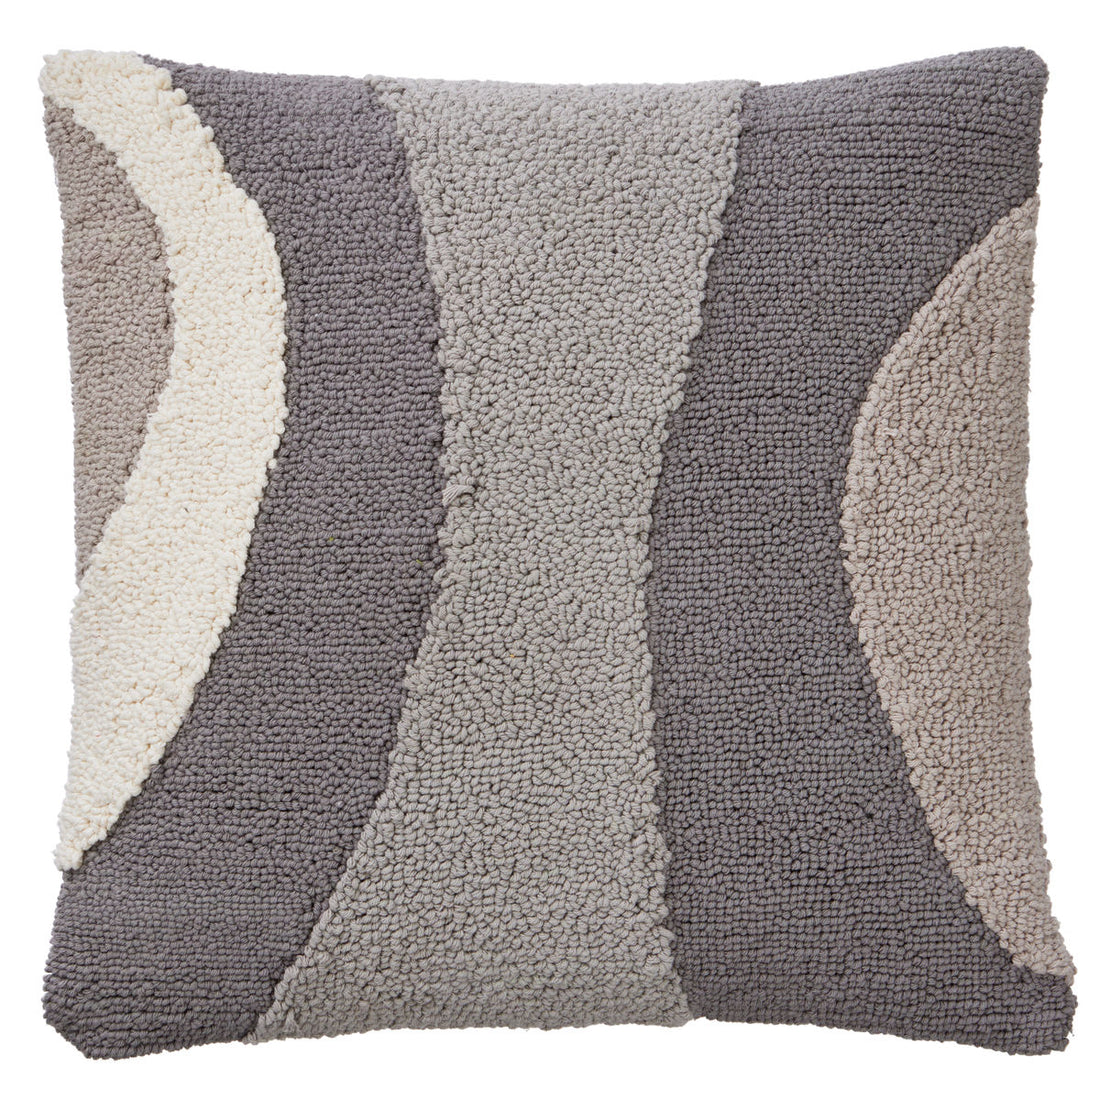 Cozy Living Chantel Tufted Embroidery Cushion Cover - Gray Blend